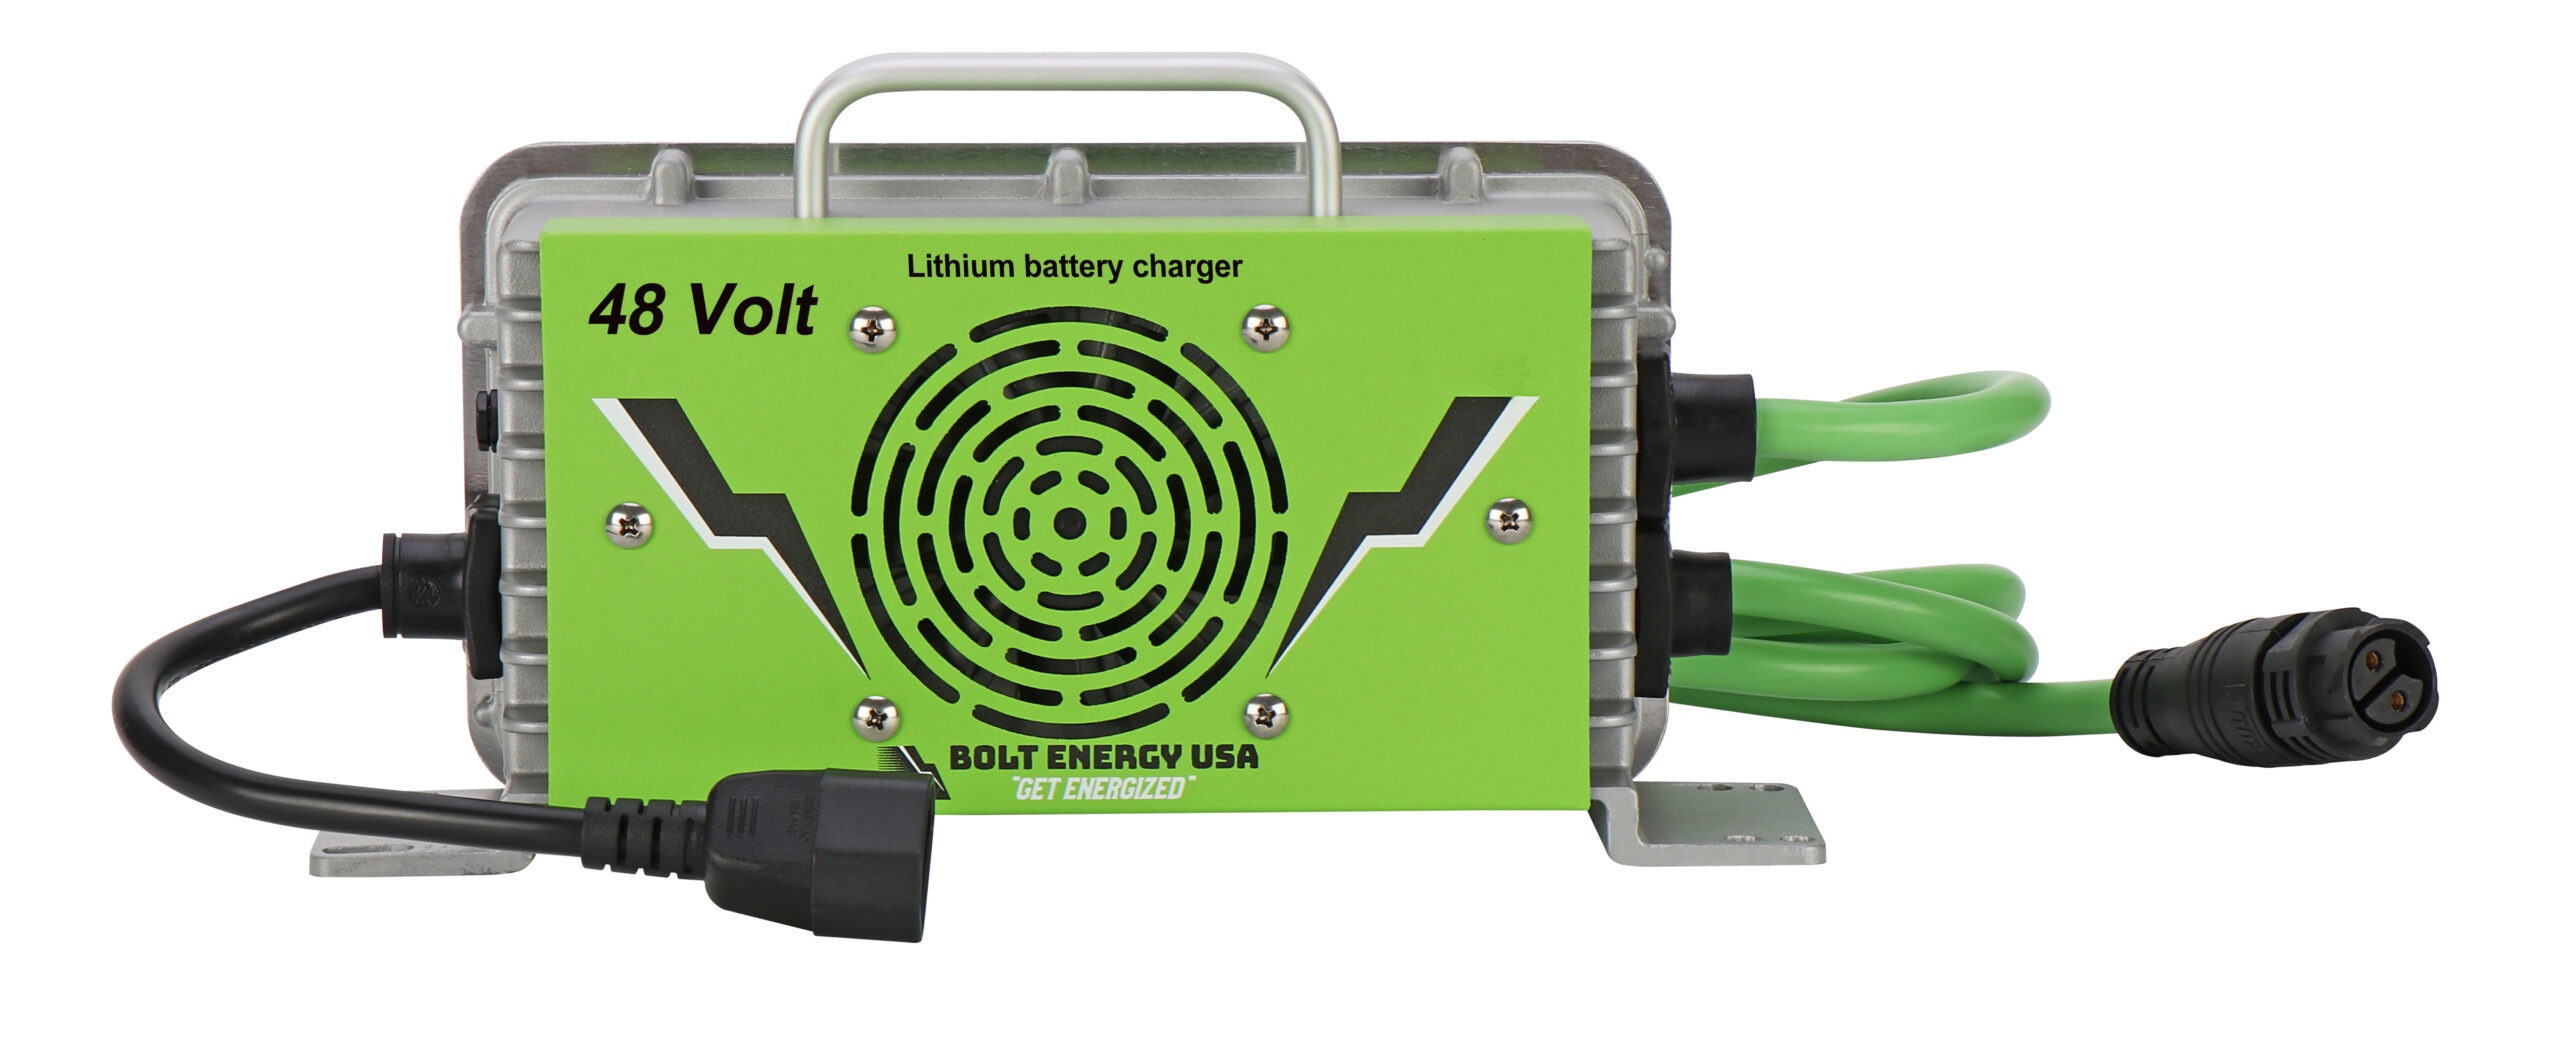 https://boltenergyusa.com/wp-content/uploads/2023/07/48V-Lithium-battery-charger-scaled.jpg